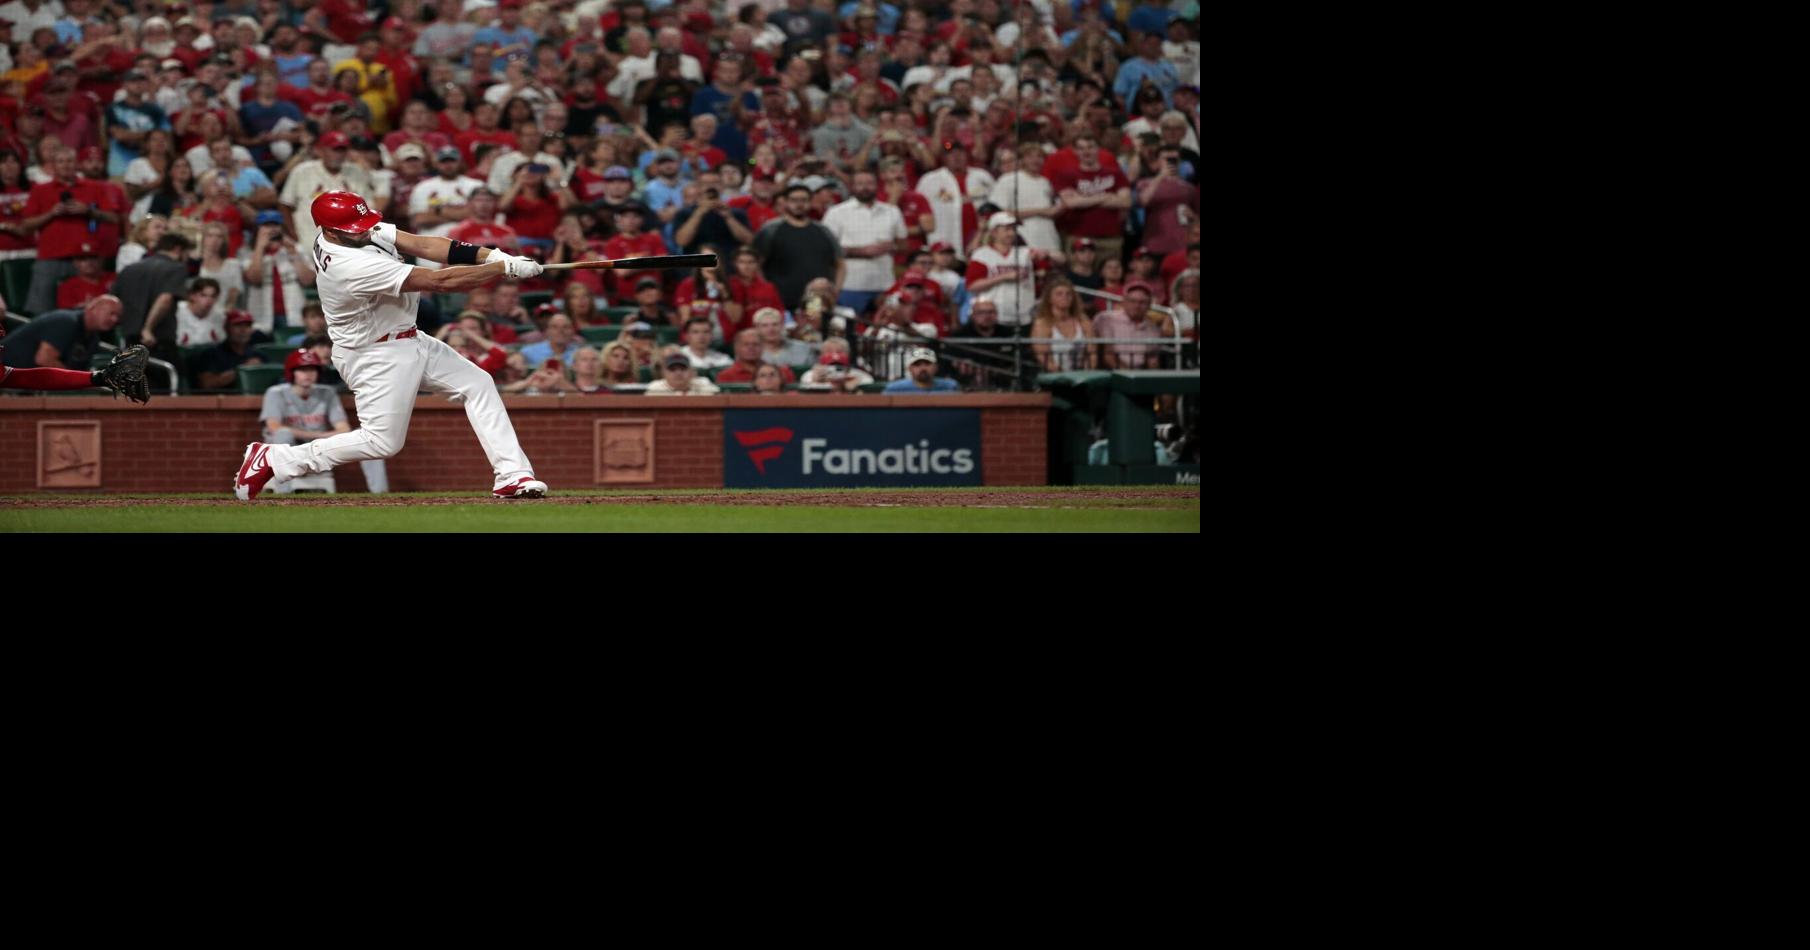 Pujols hits 698th homer, closes in on 700 milestone